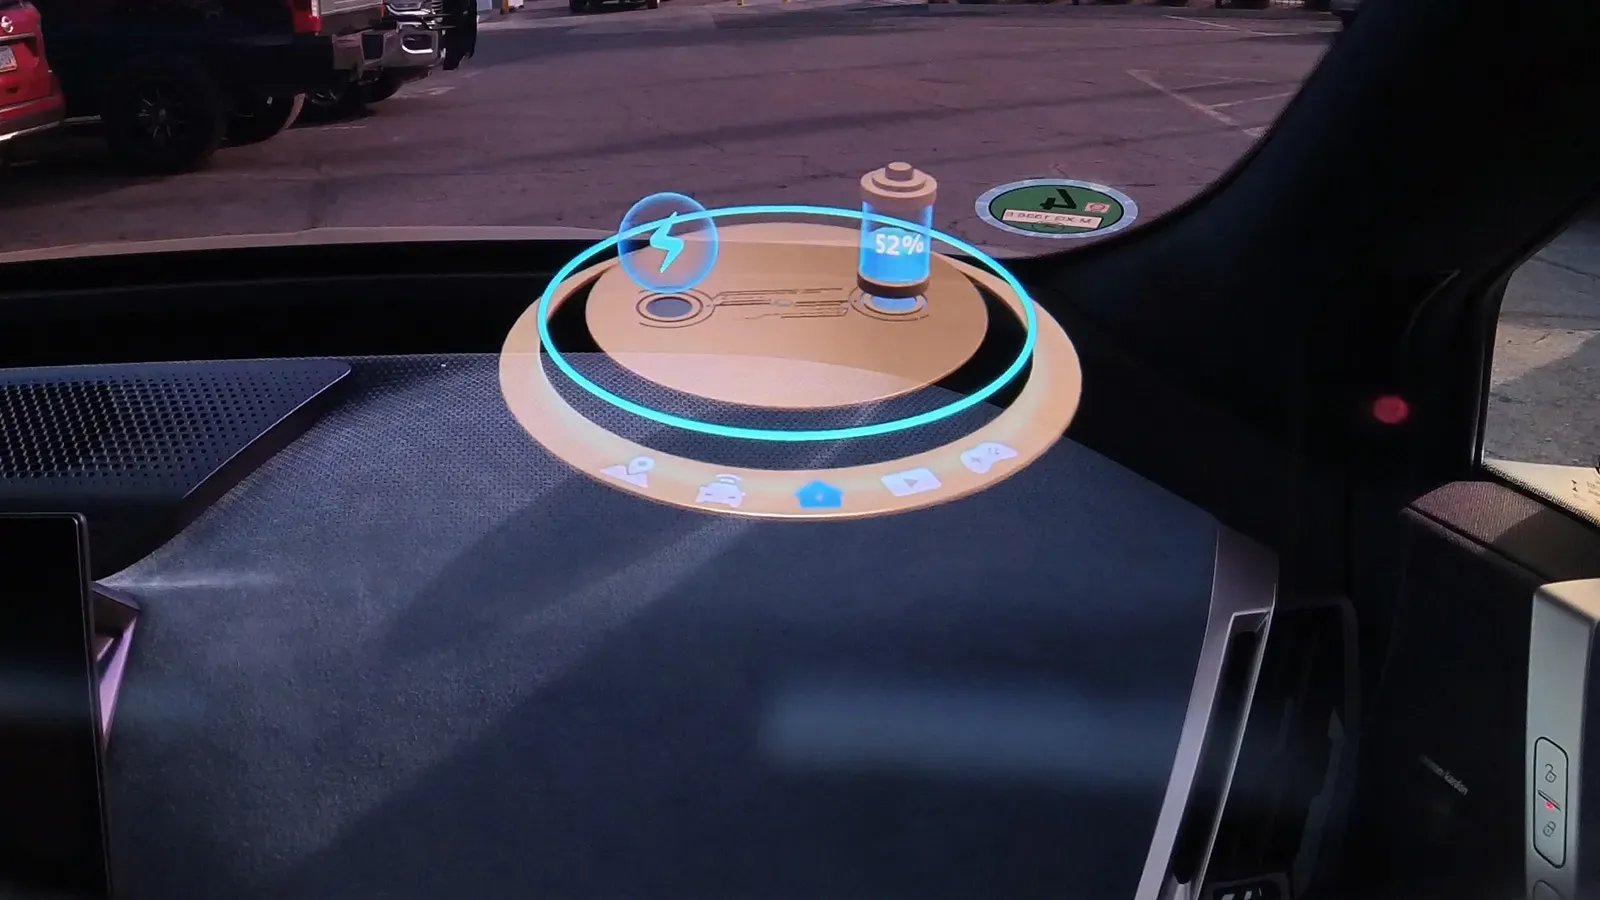 BMW augmented reality technology